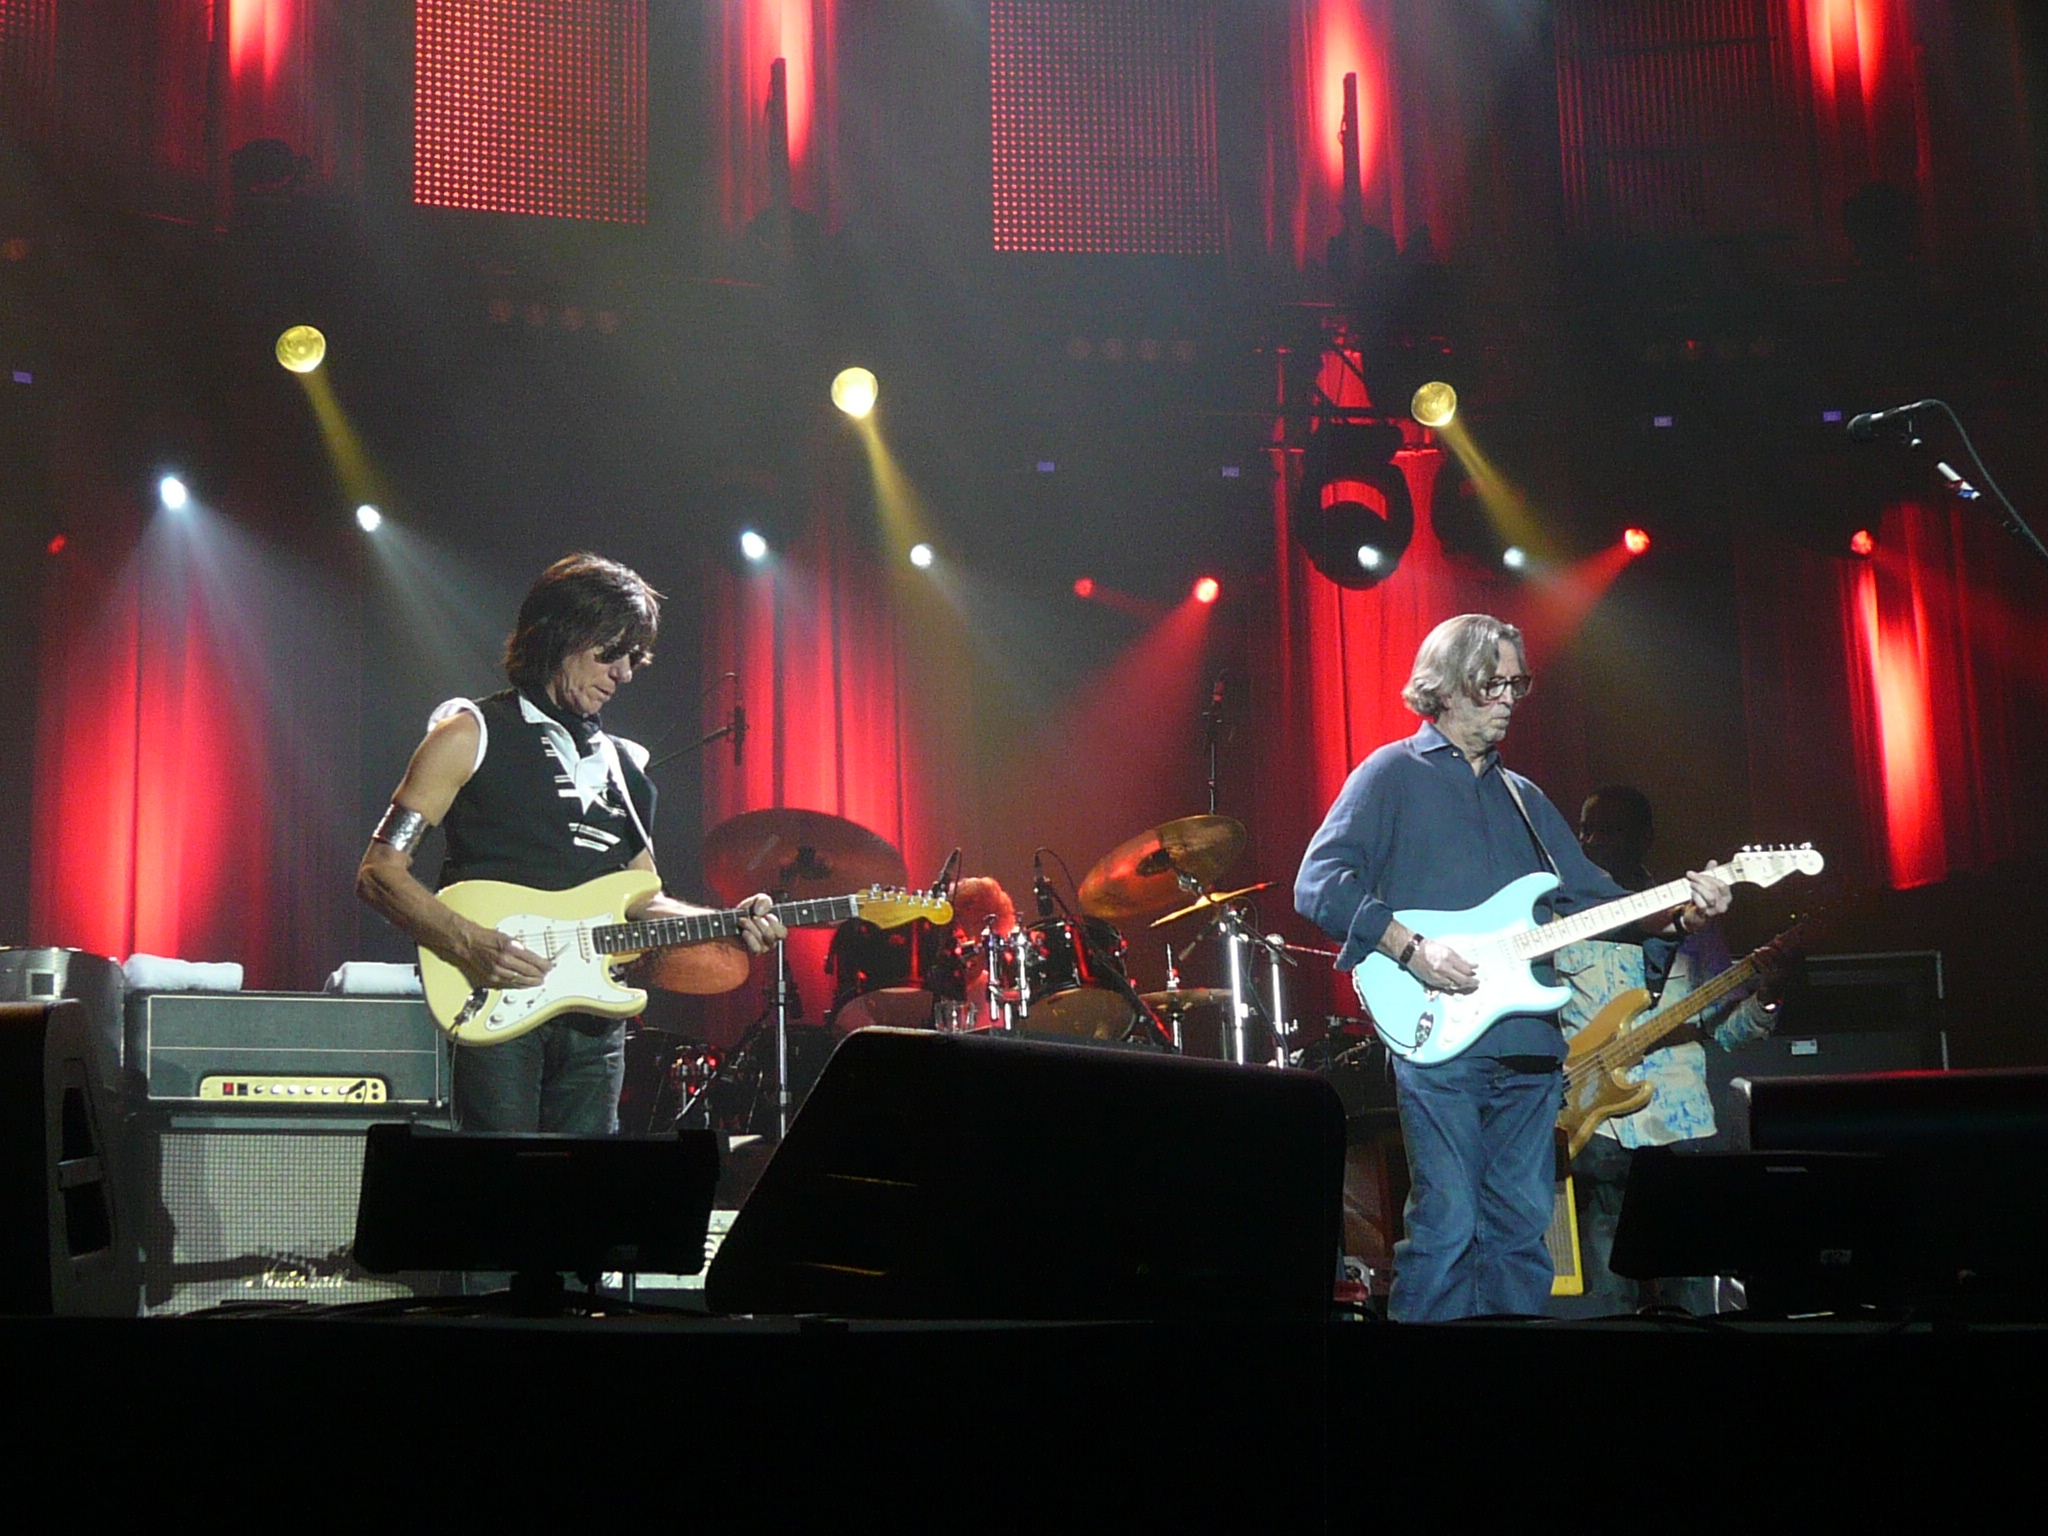 jeff beck and eric clapton at the o2 arena london sunday 14 february 2010